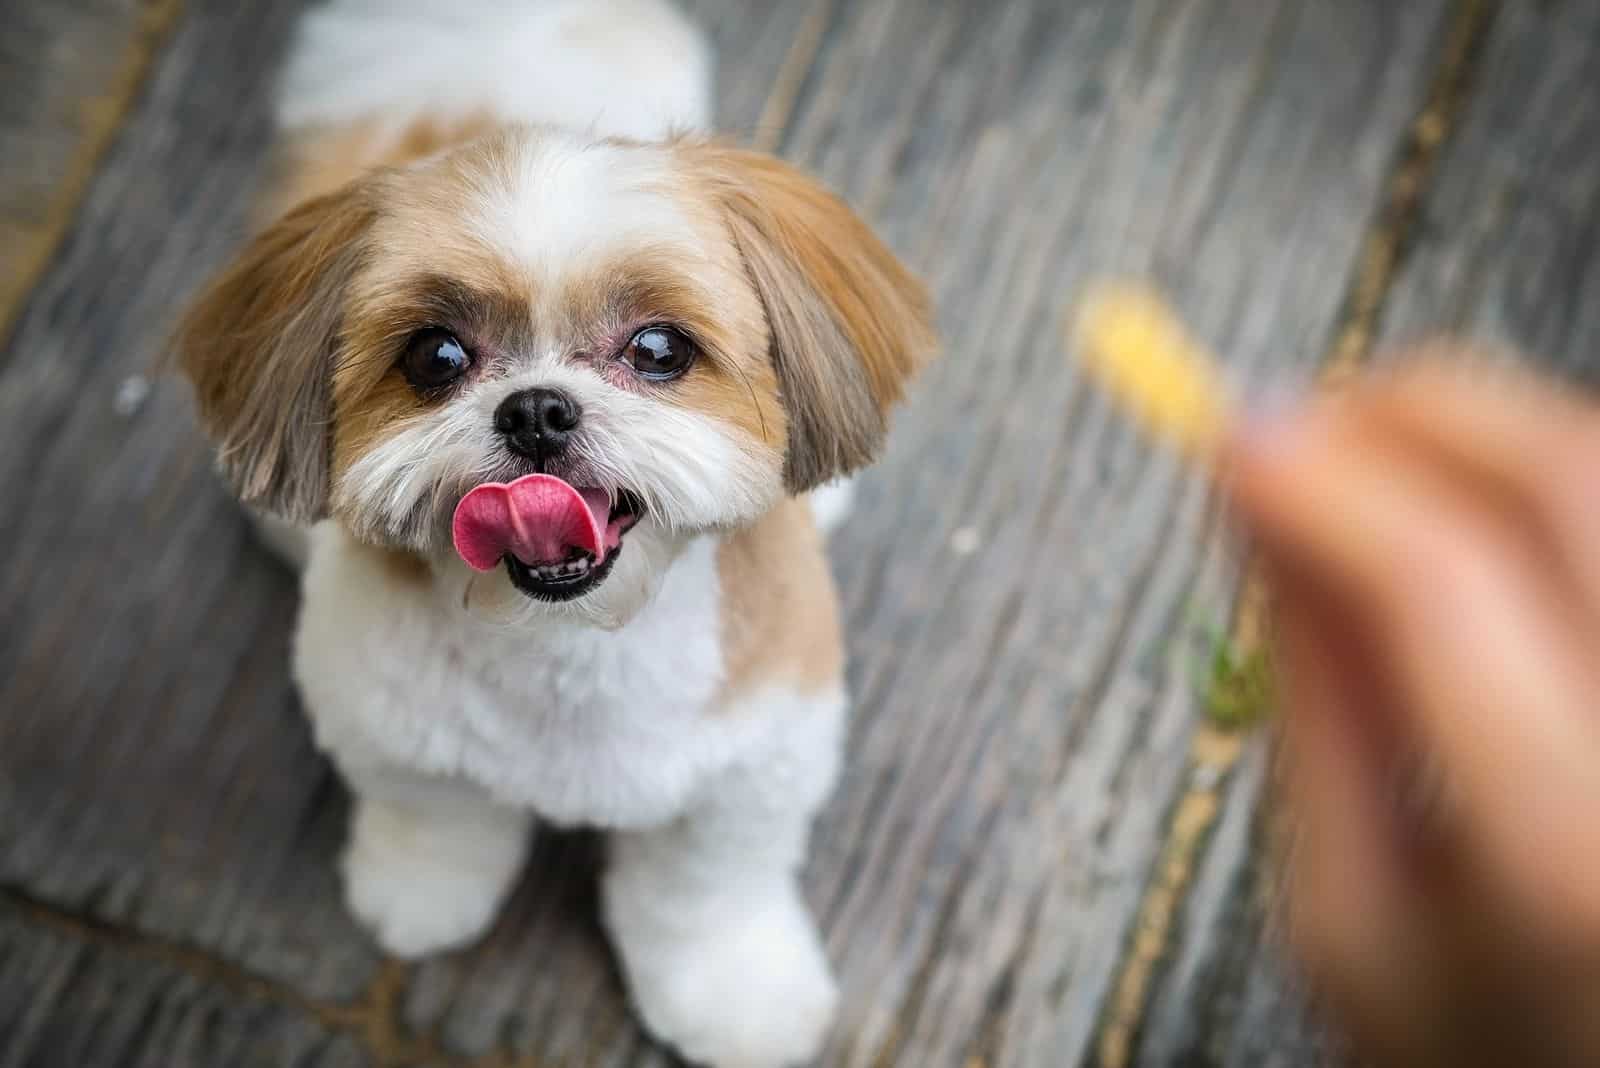 Shih tzu looking at the snack at the hand of a person